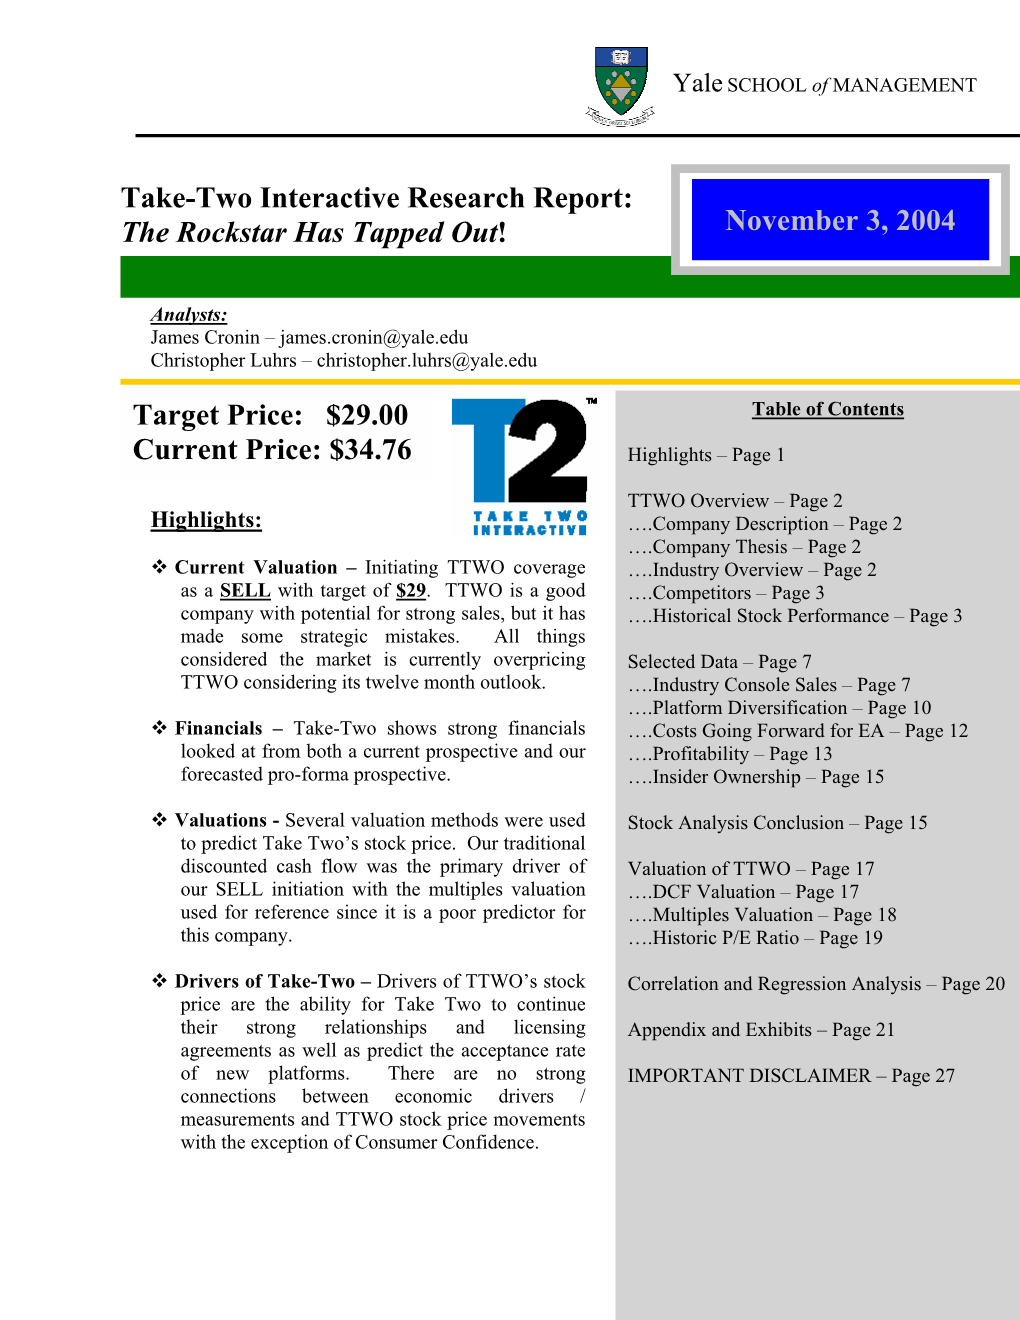 Take-Two Interactive Research Report: the Rockstar Has Tapped Out! November 3, 2004